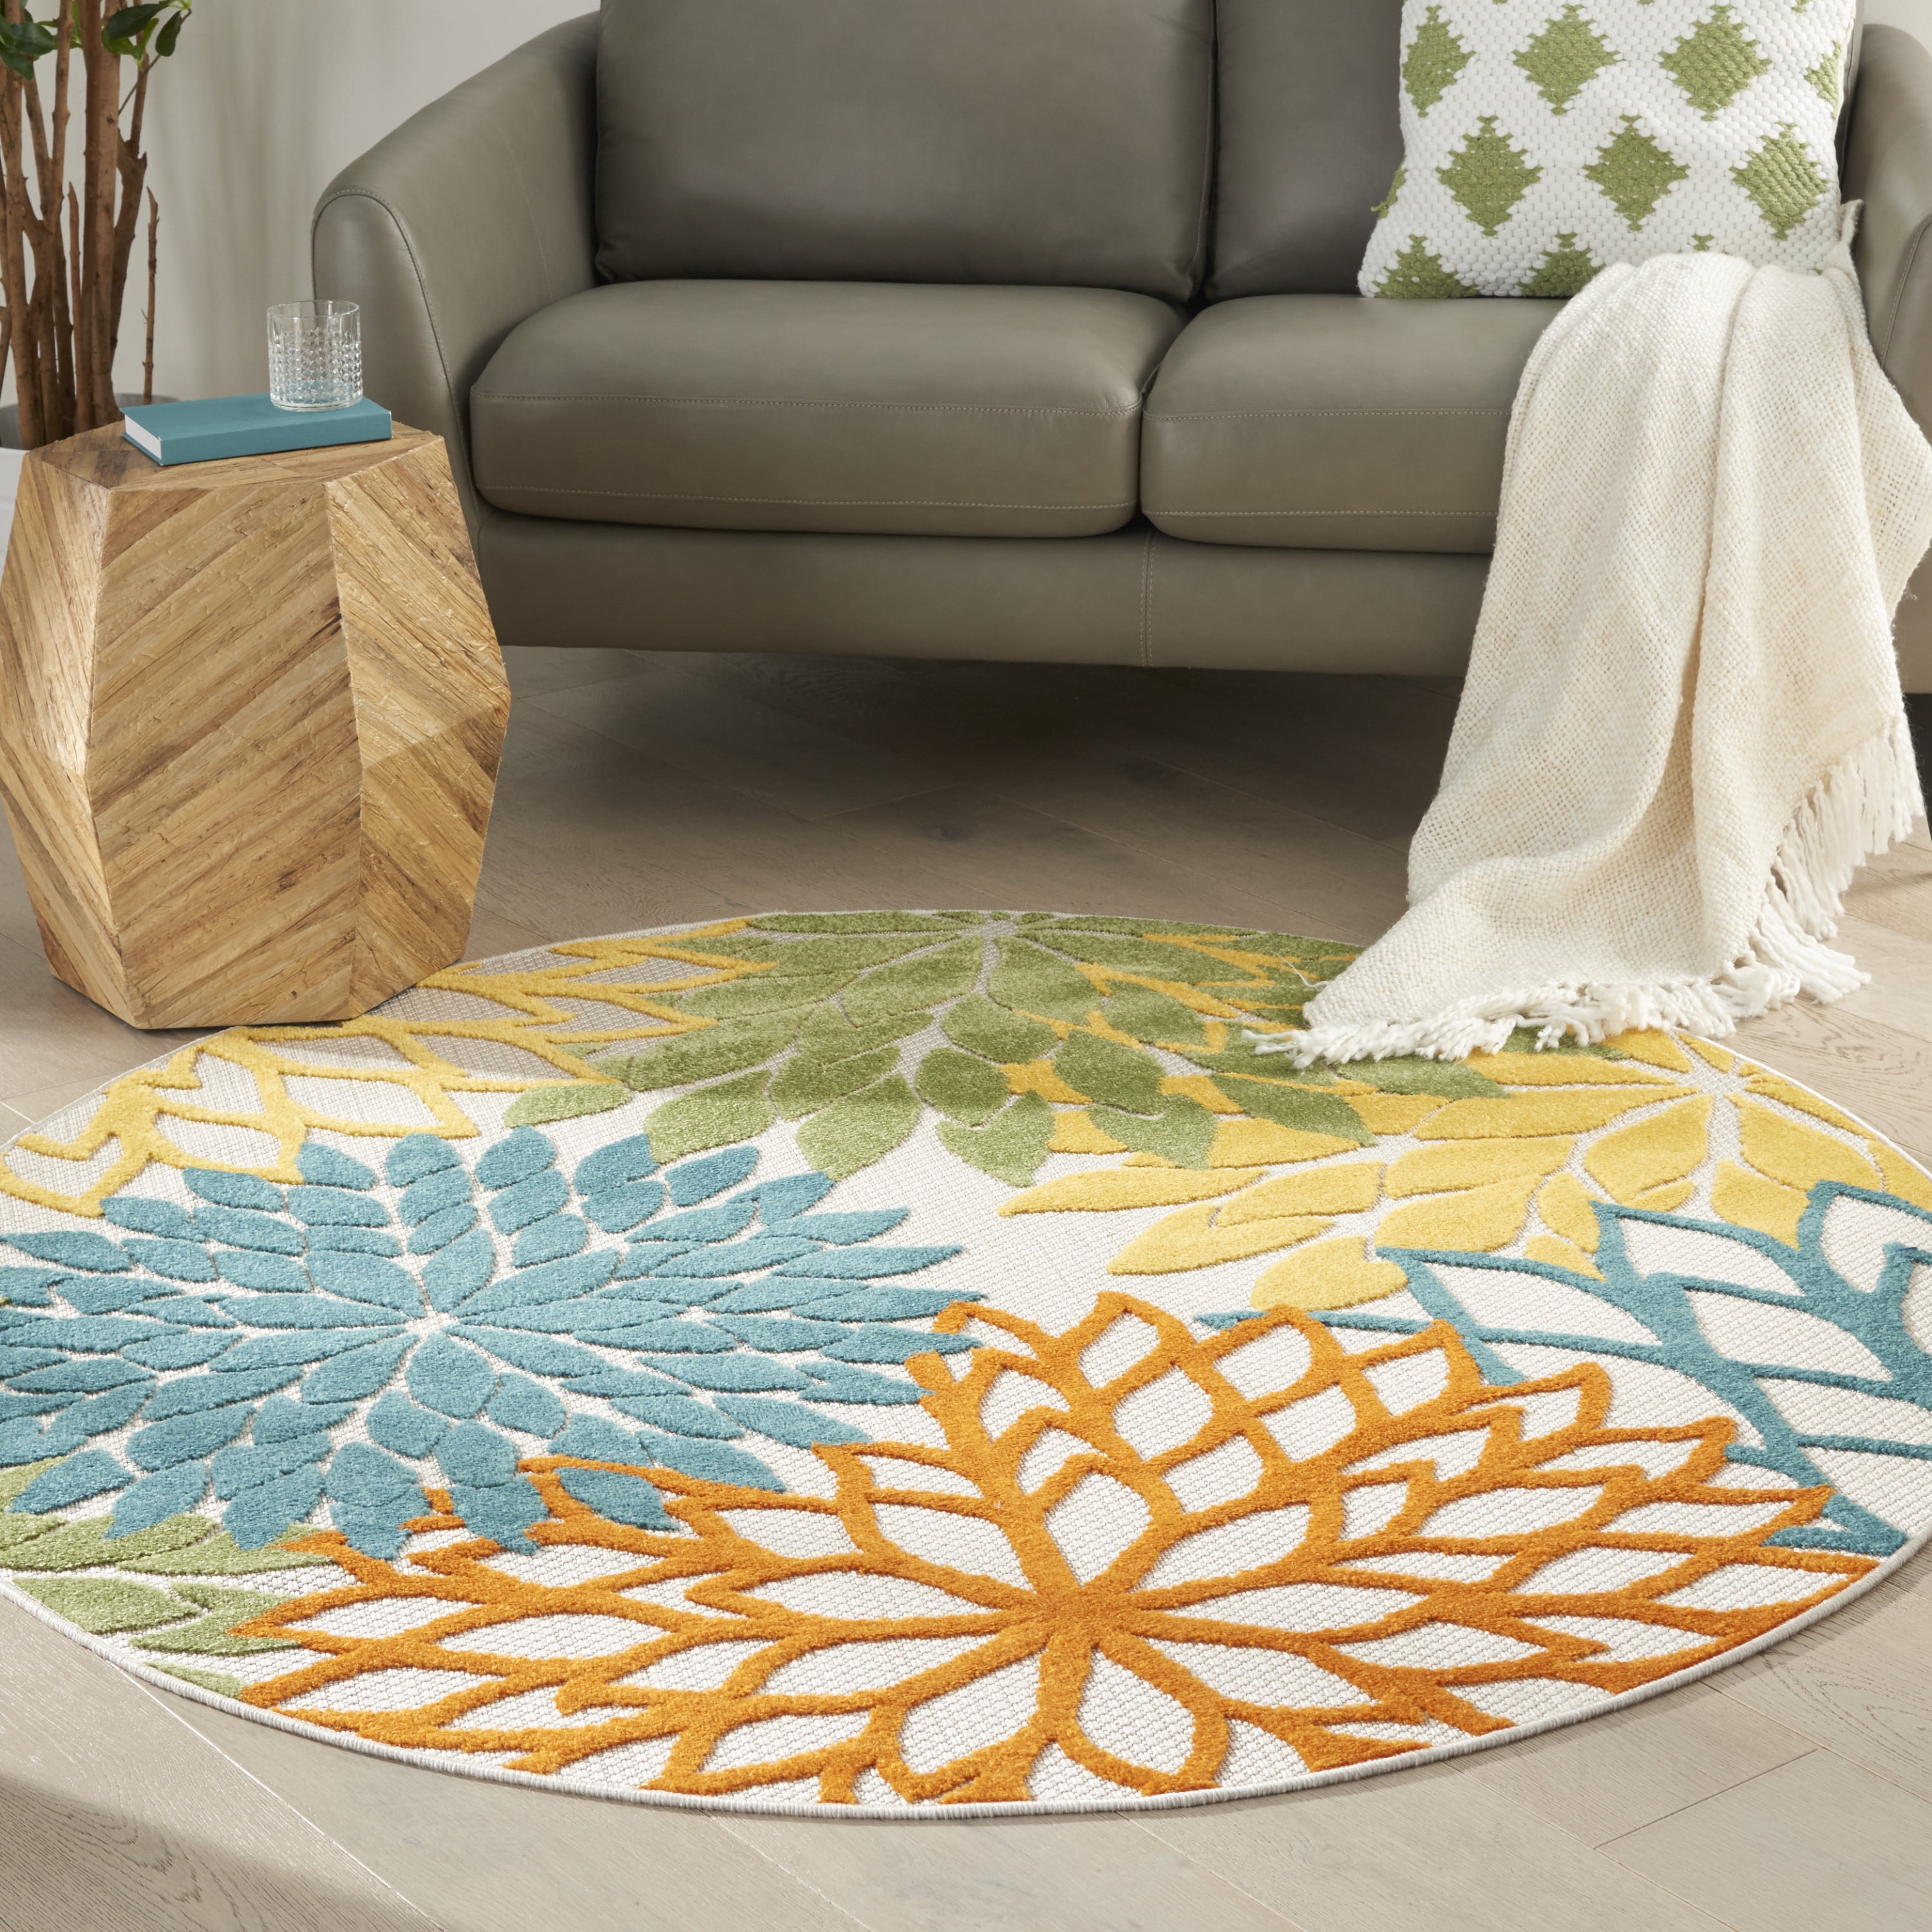 5' x 8' Nourison Aloha Indoor/Outdoor Floral Turquoise Multicolor 5'3 x 7'5 Area Rug,